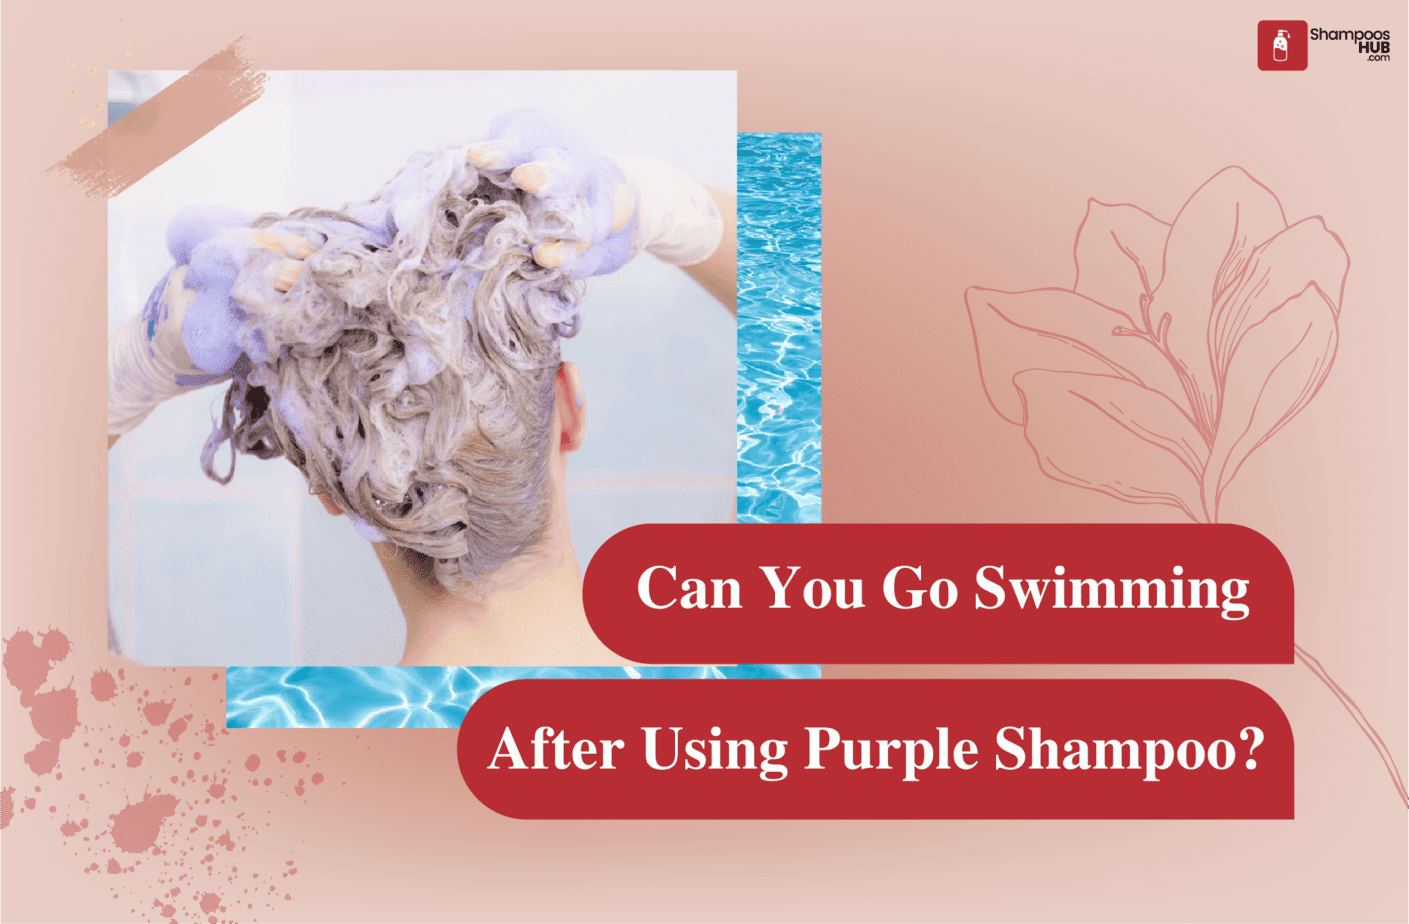 Can You Go Swimming After Using Purple Shampoo?